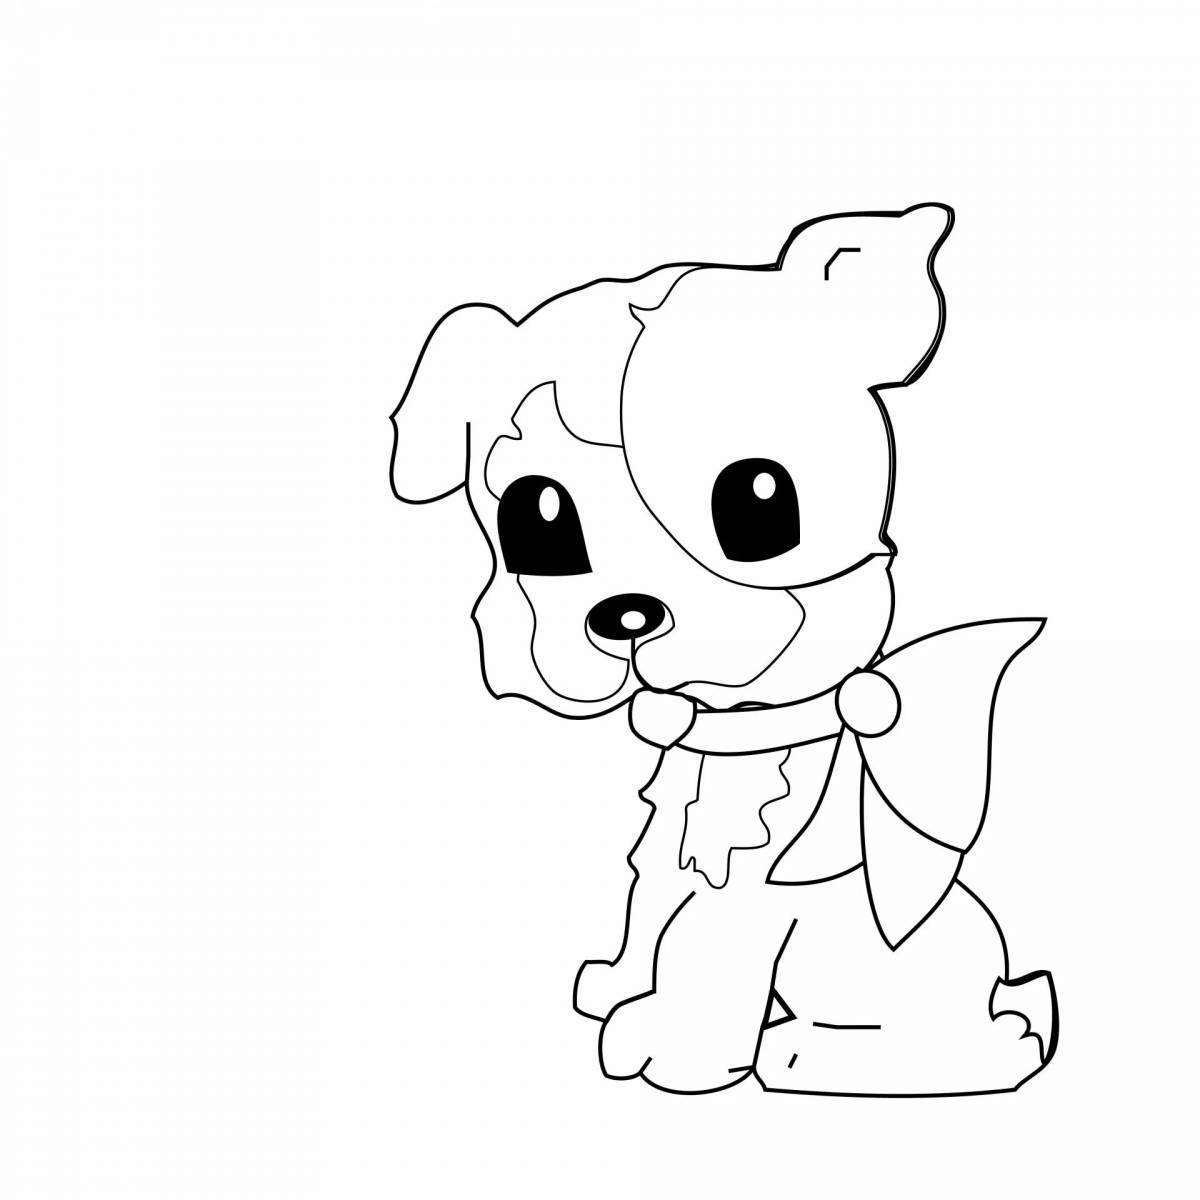 Playful cute dog coloring book